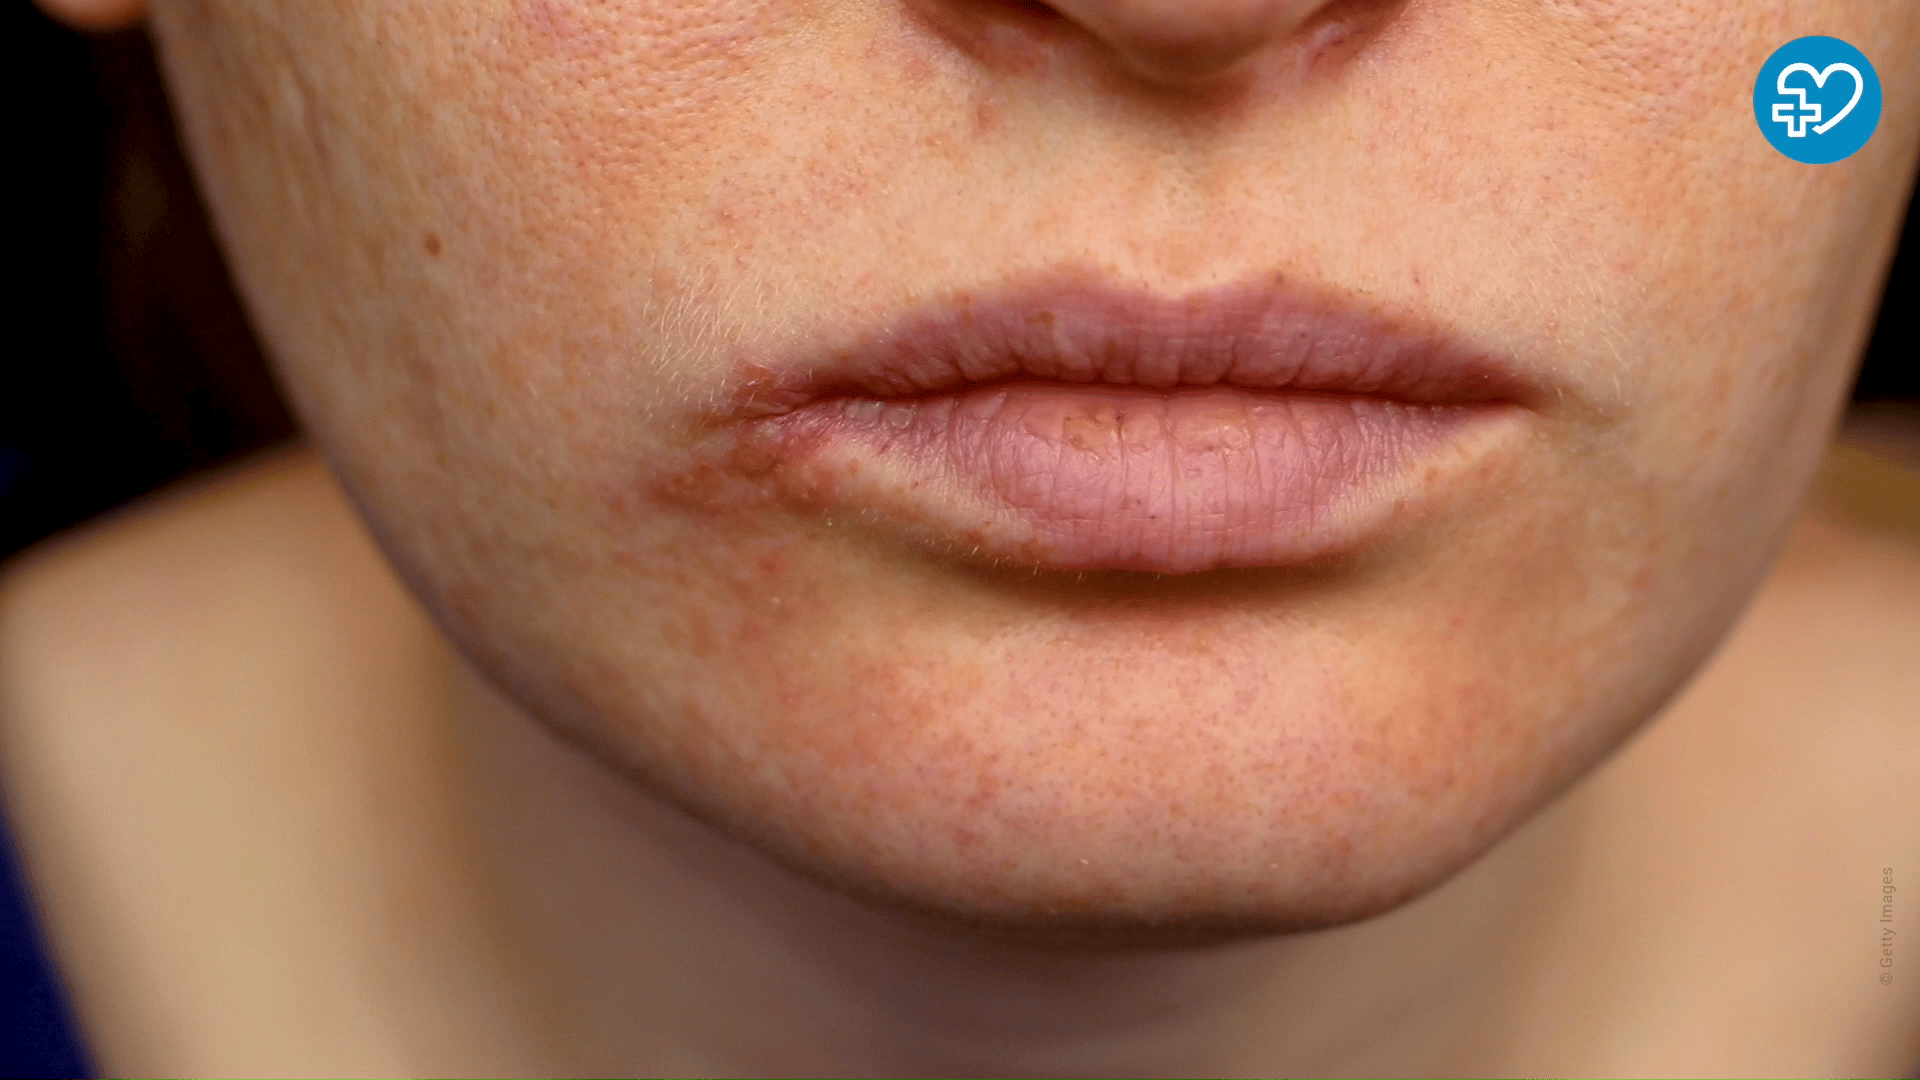 Pin on Herpes Treatments